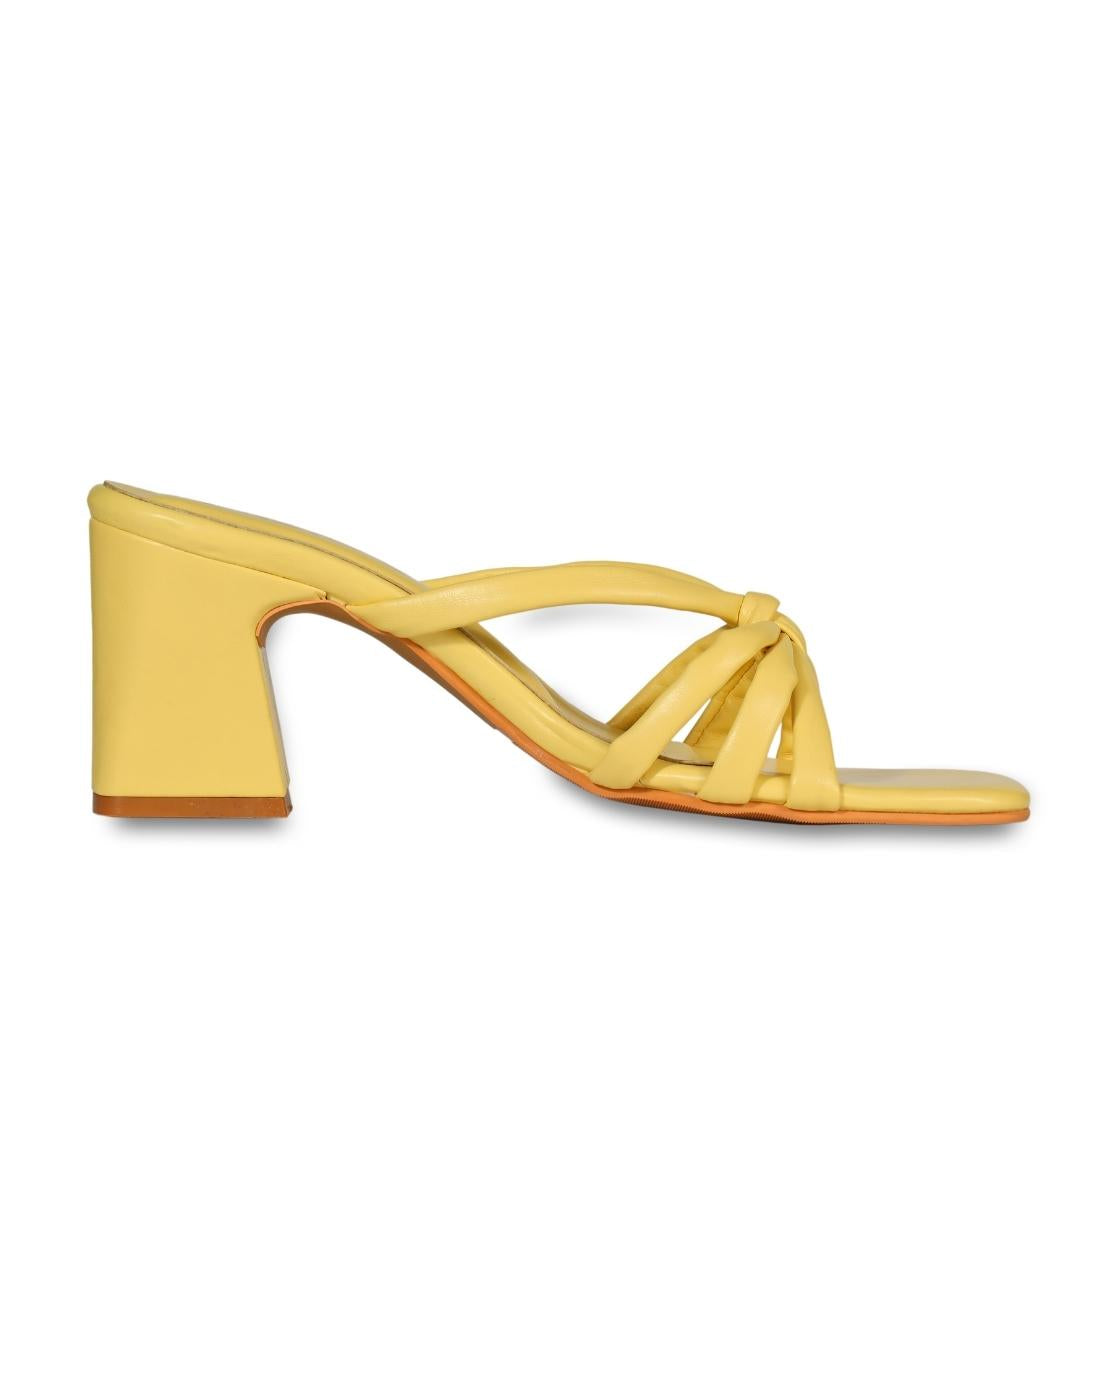 Yellow Suede Straps High Heels Sandals Shoes